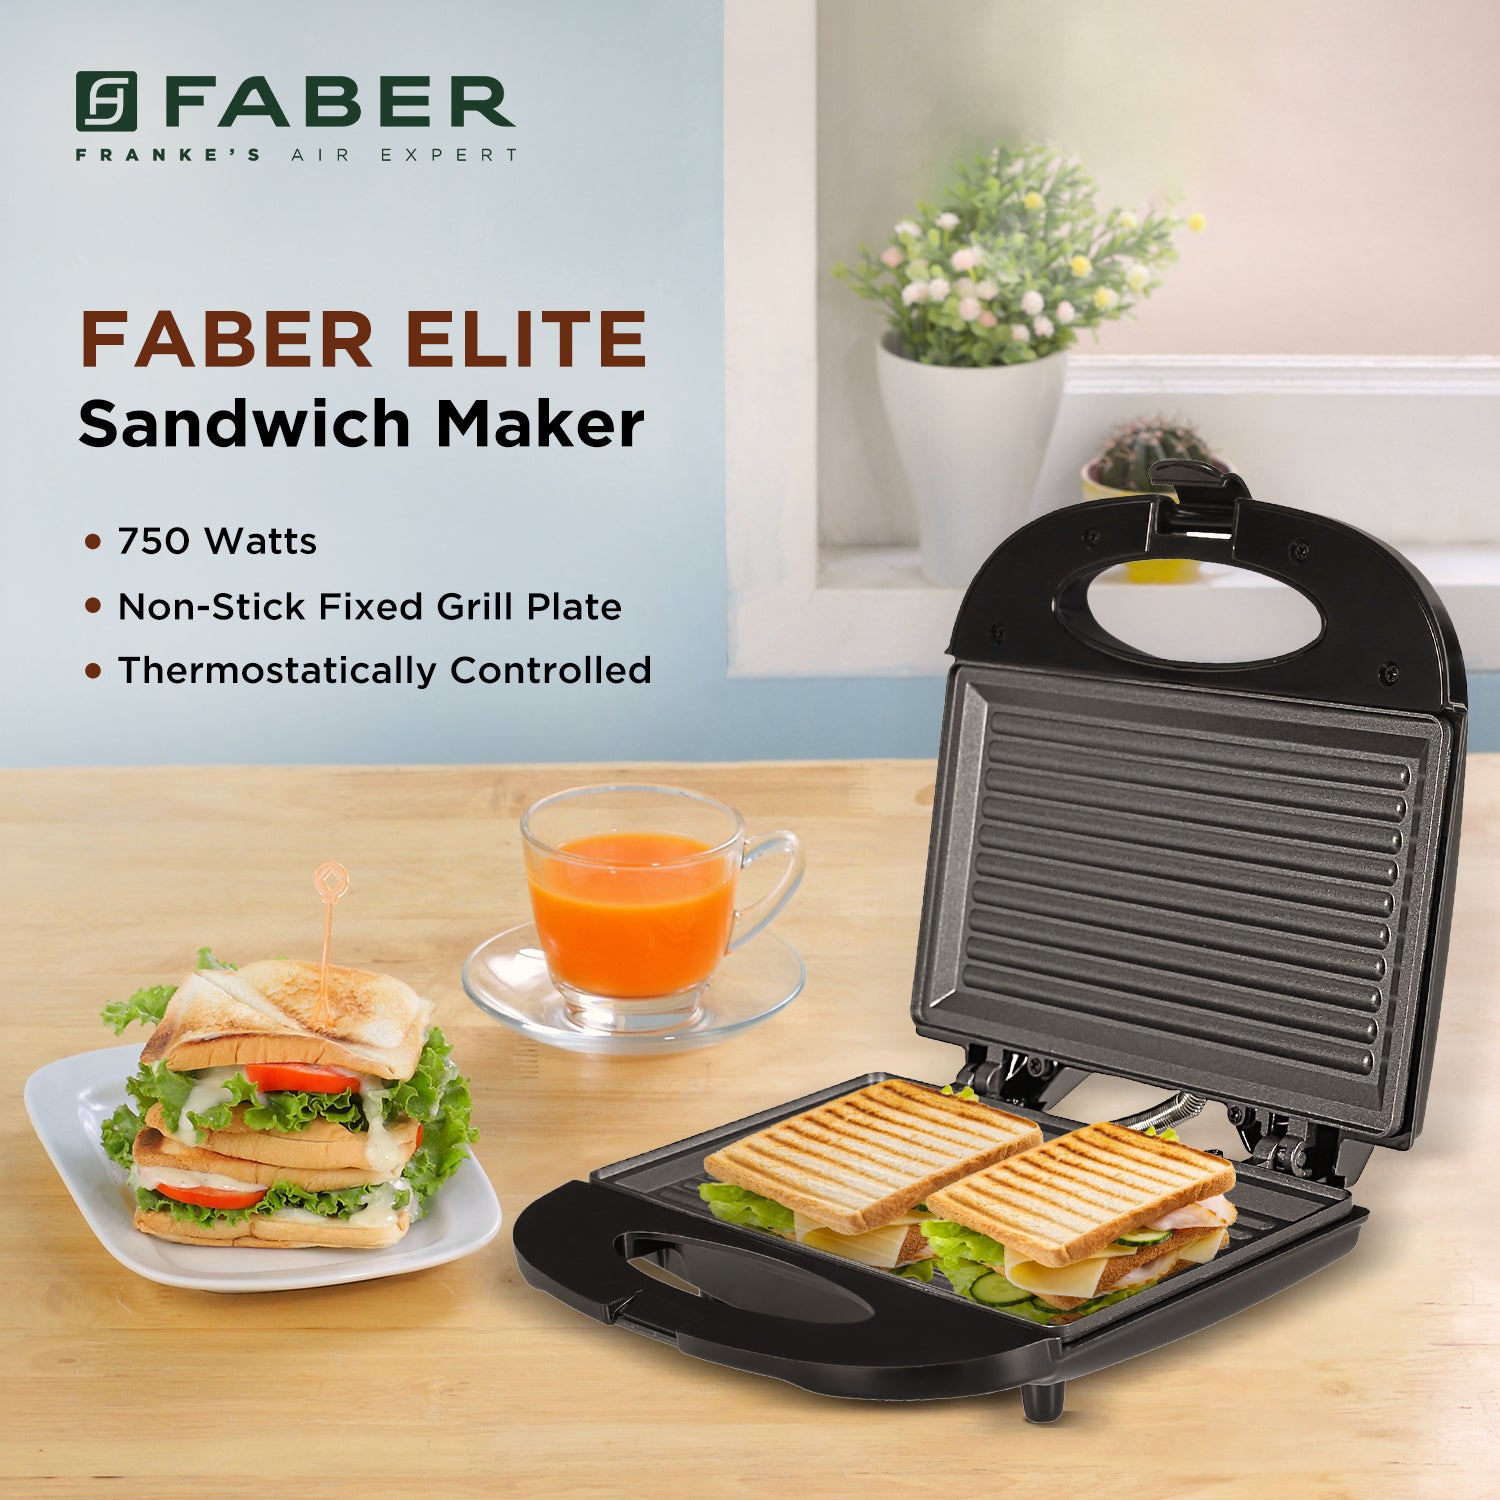 Sandwich Toaster: Buy Grill Sandwich Maker & Toasters at Best Price in India